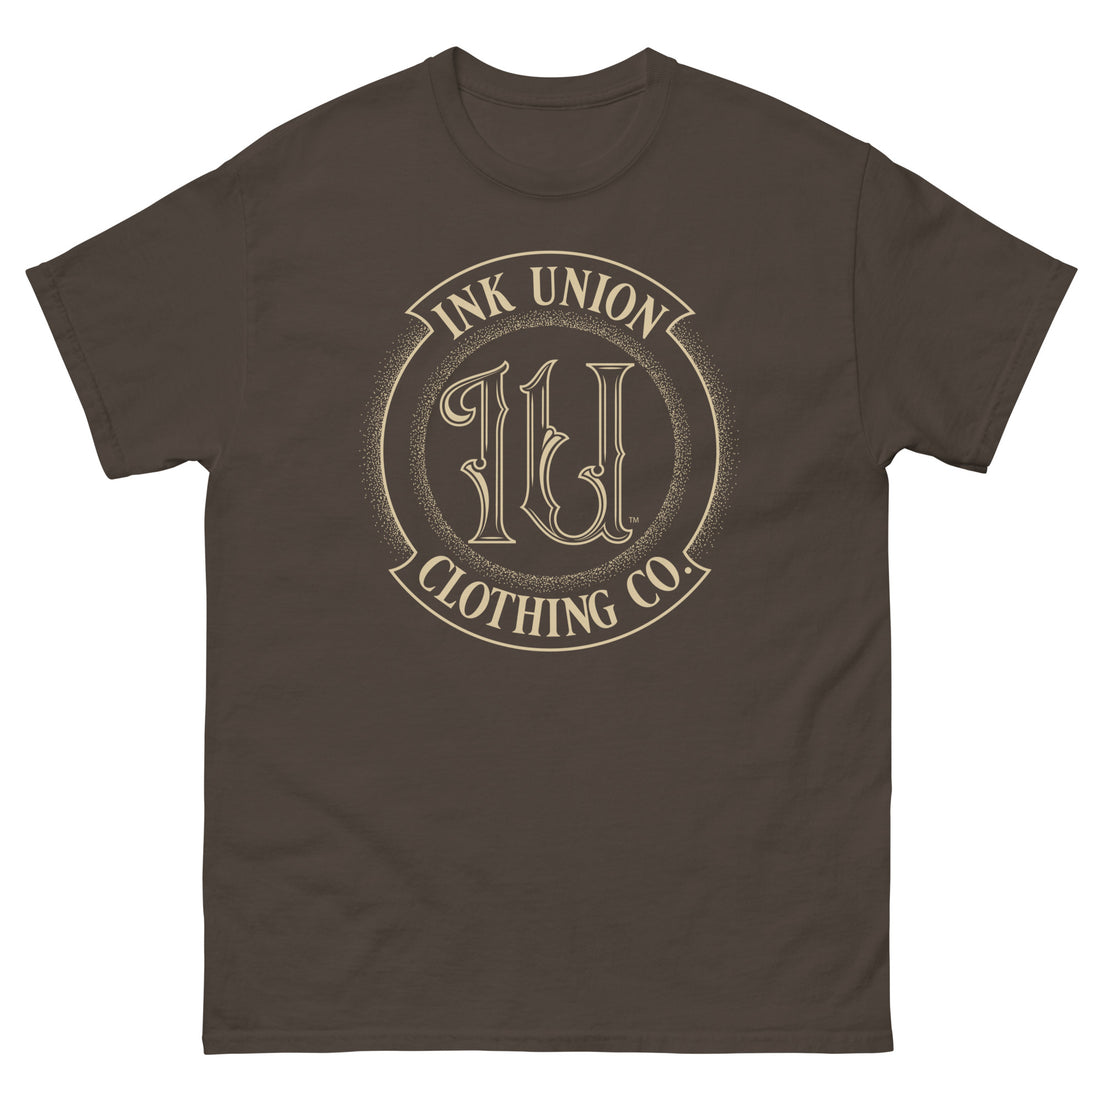 A brown t-shirt adorned with the Ink Union Clothing Co gold badge logo containing fancy lettering and dot work gradients.